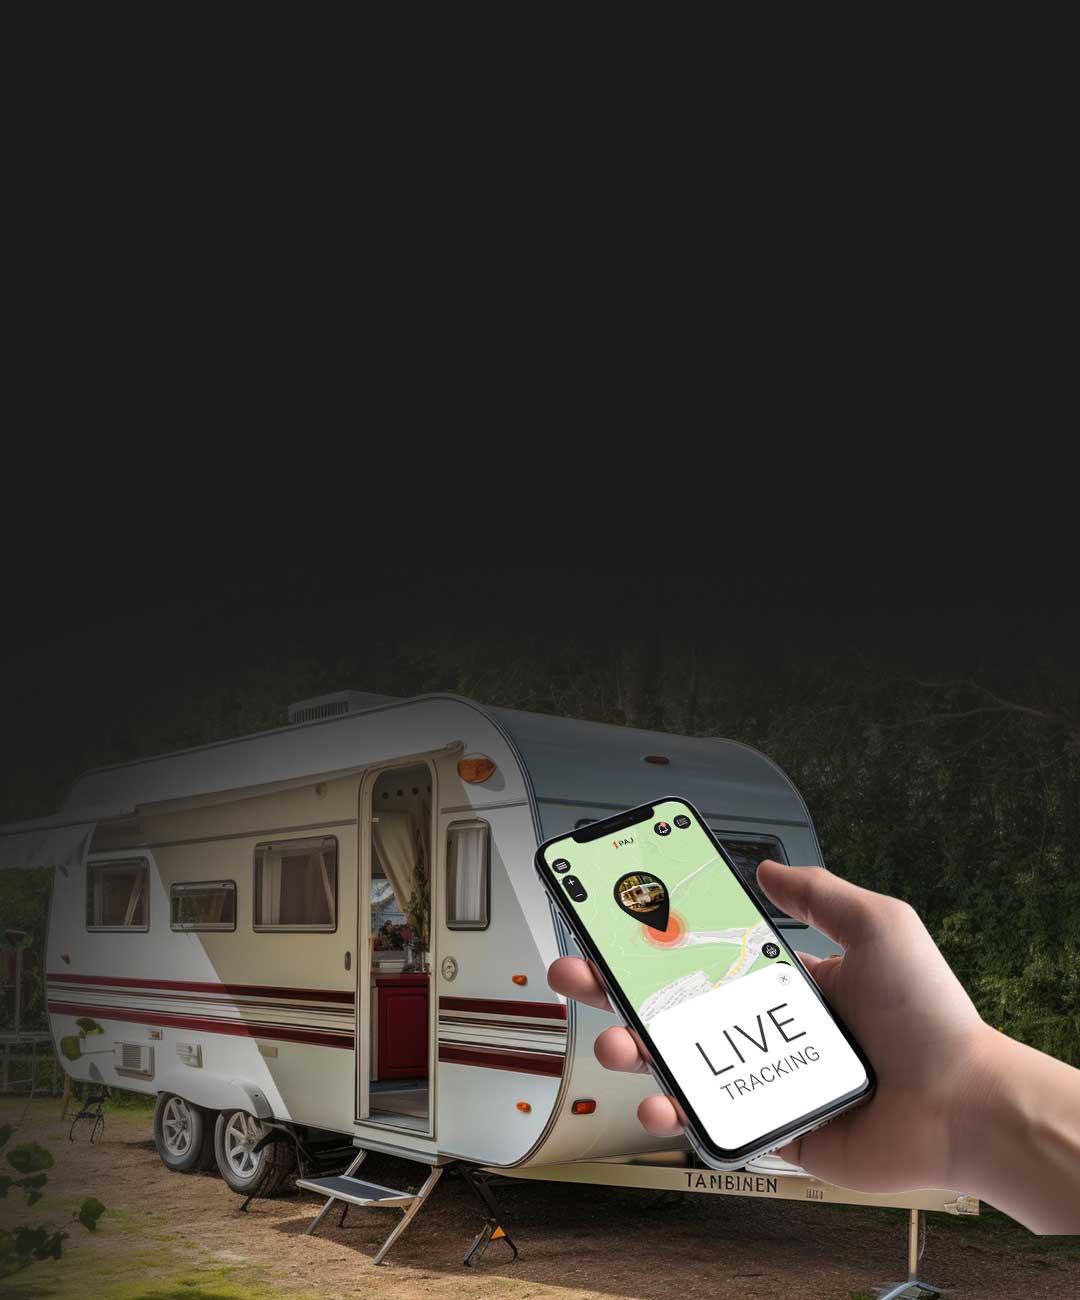 A caravan in a field is installed with a tracking device